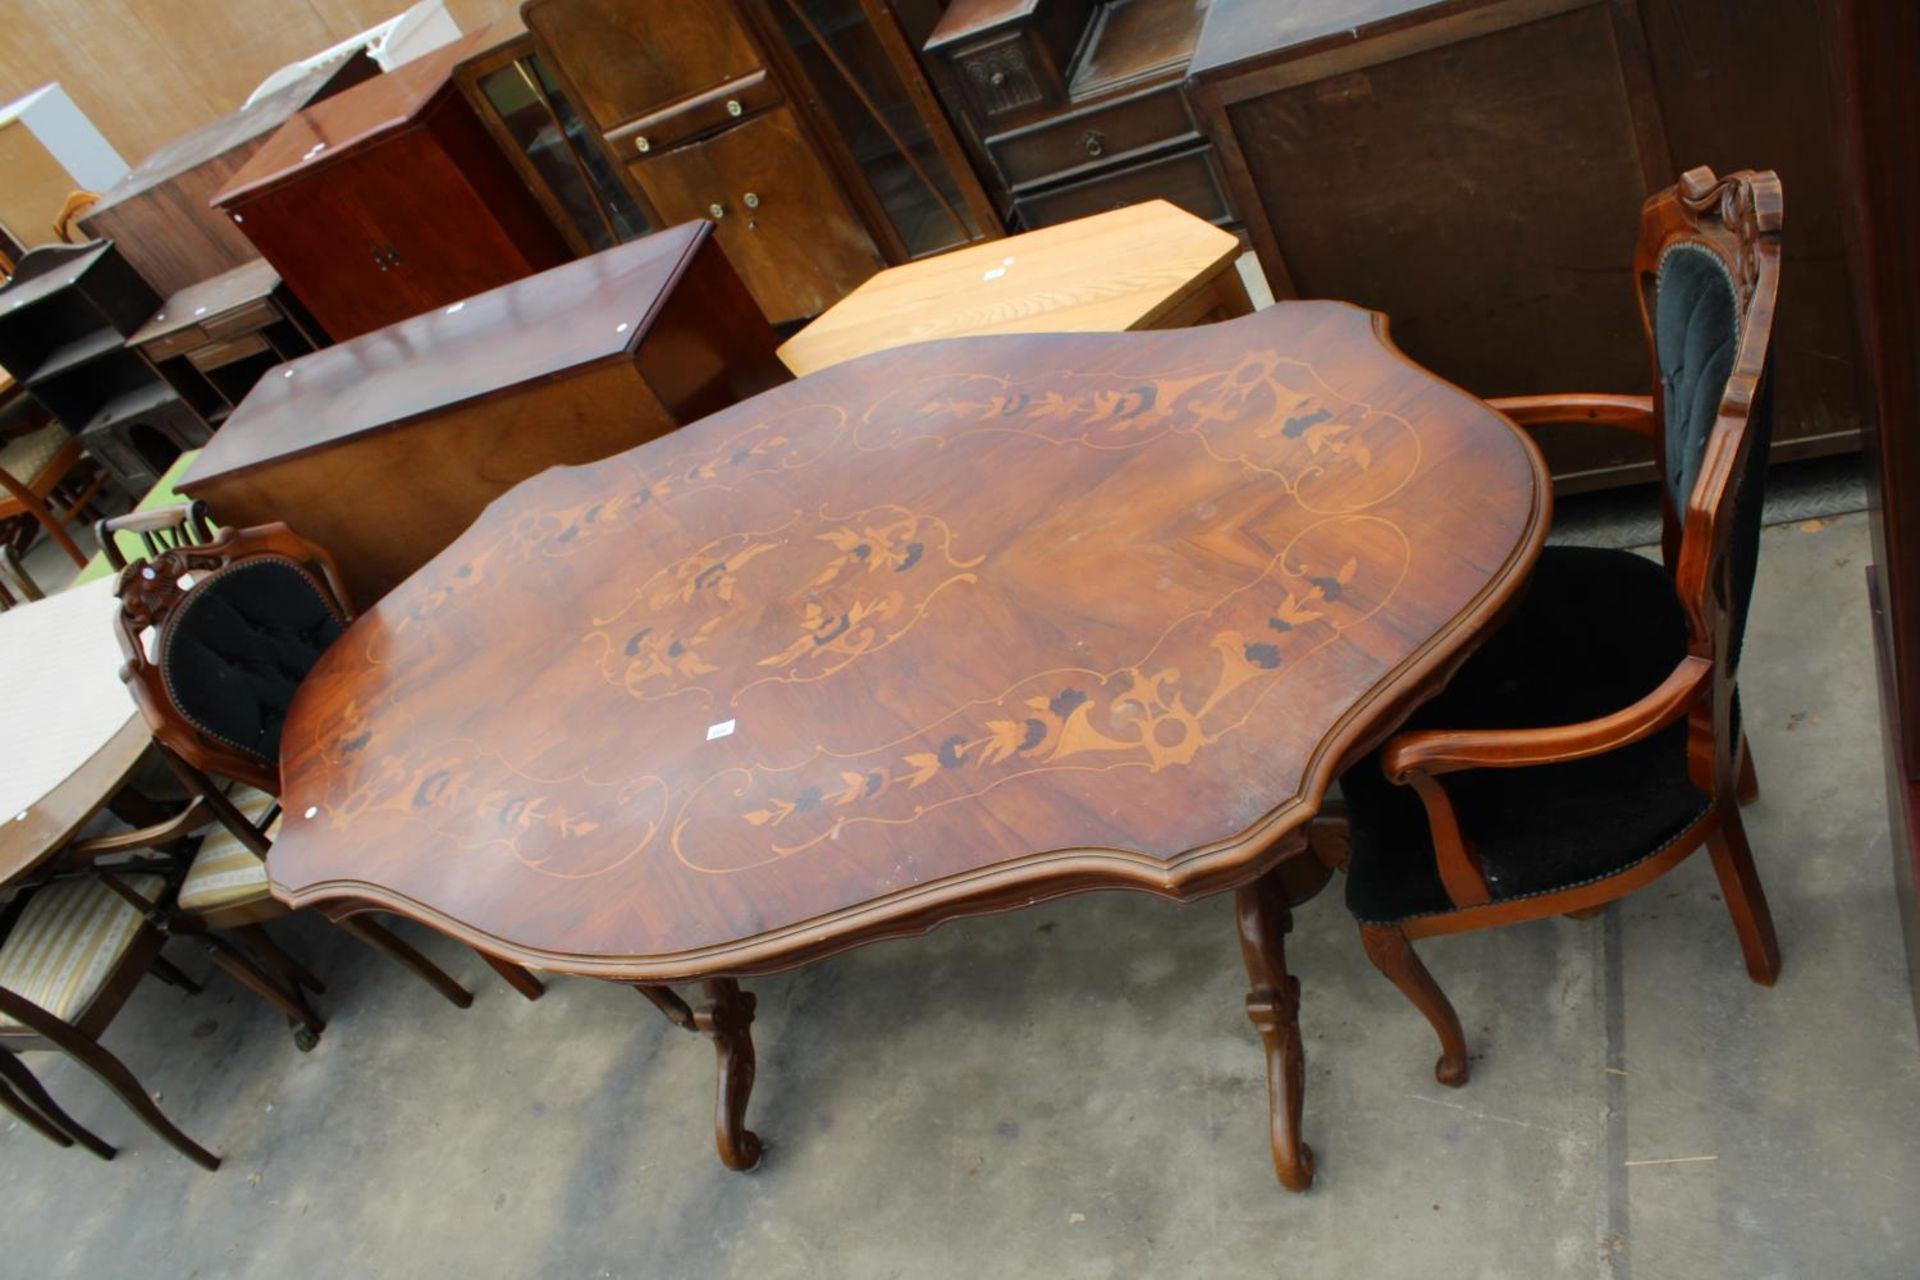 AN ITALIAN STYLE PEDESTAL DINING TABLE WITH MARQUETRY TOP AND A PAIR OF CARVER CHAIRS